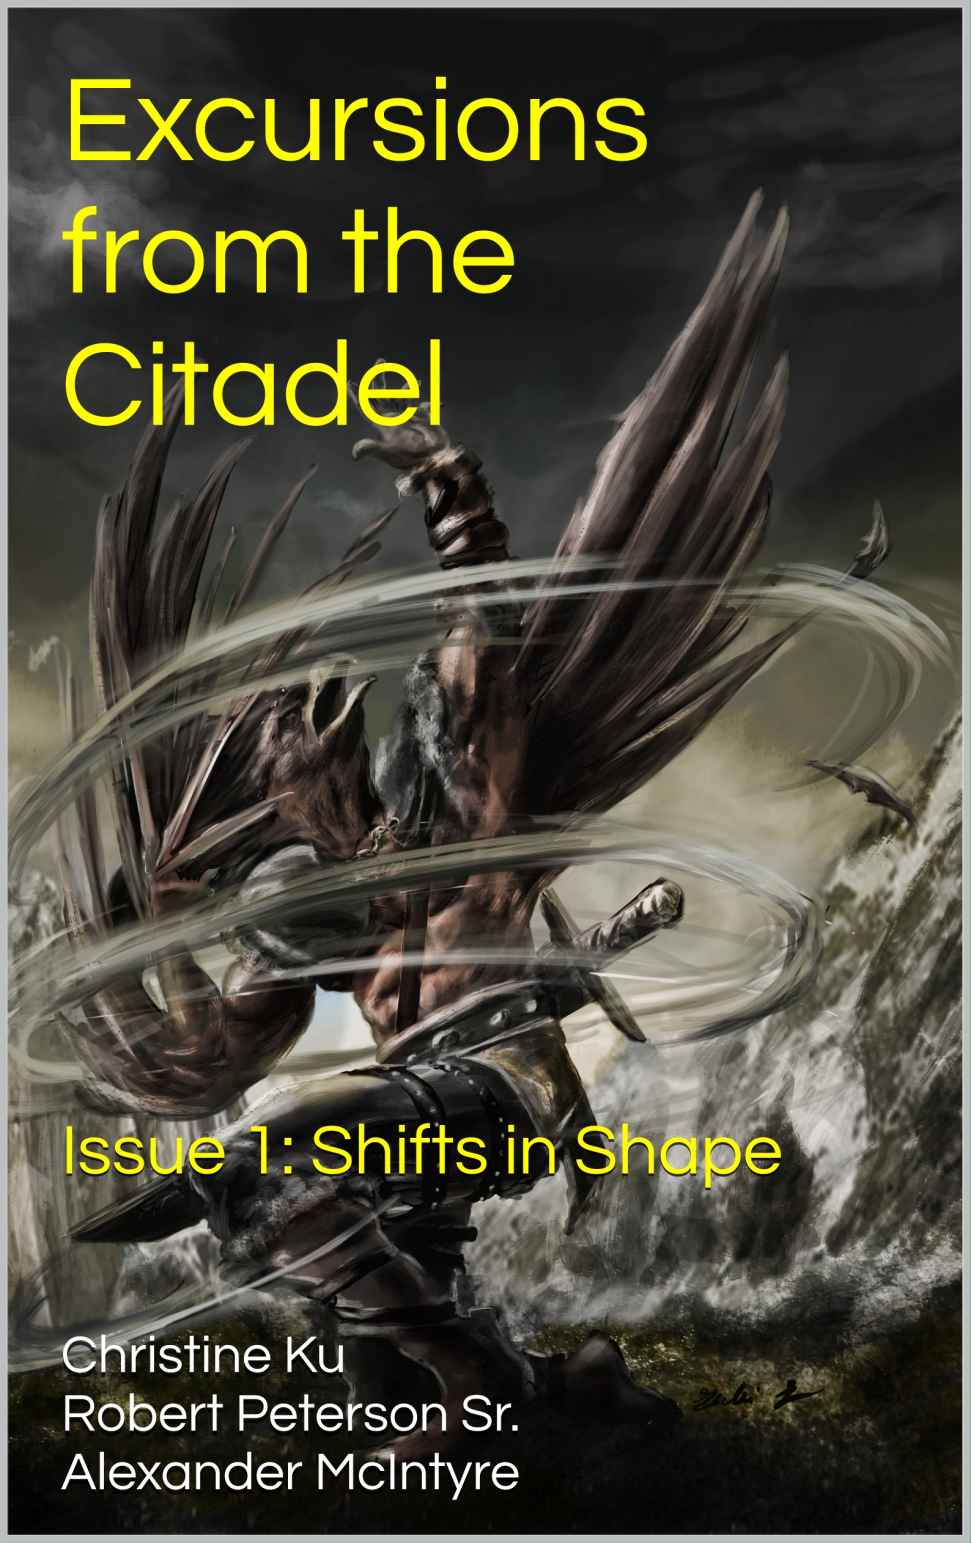 Excursions from the Citadel: Issue 1: Shifts in Shape